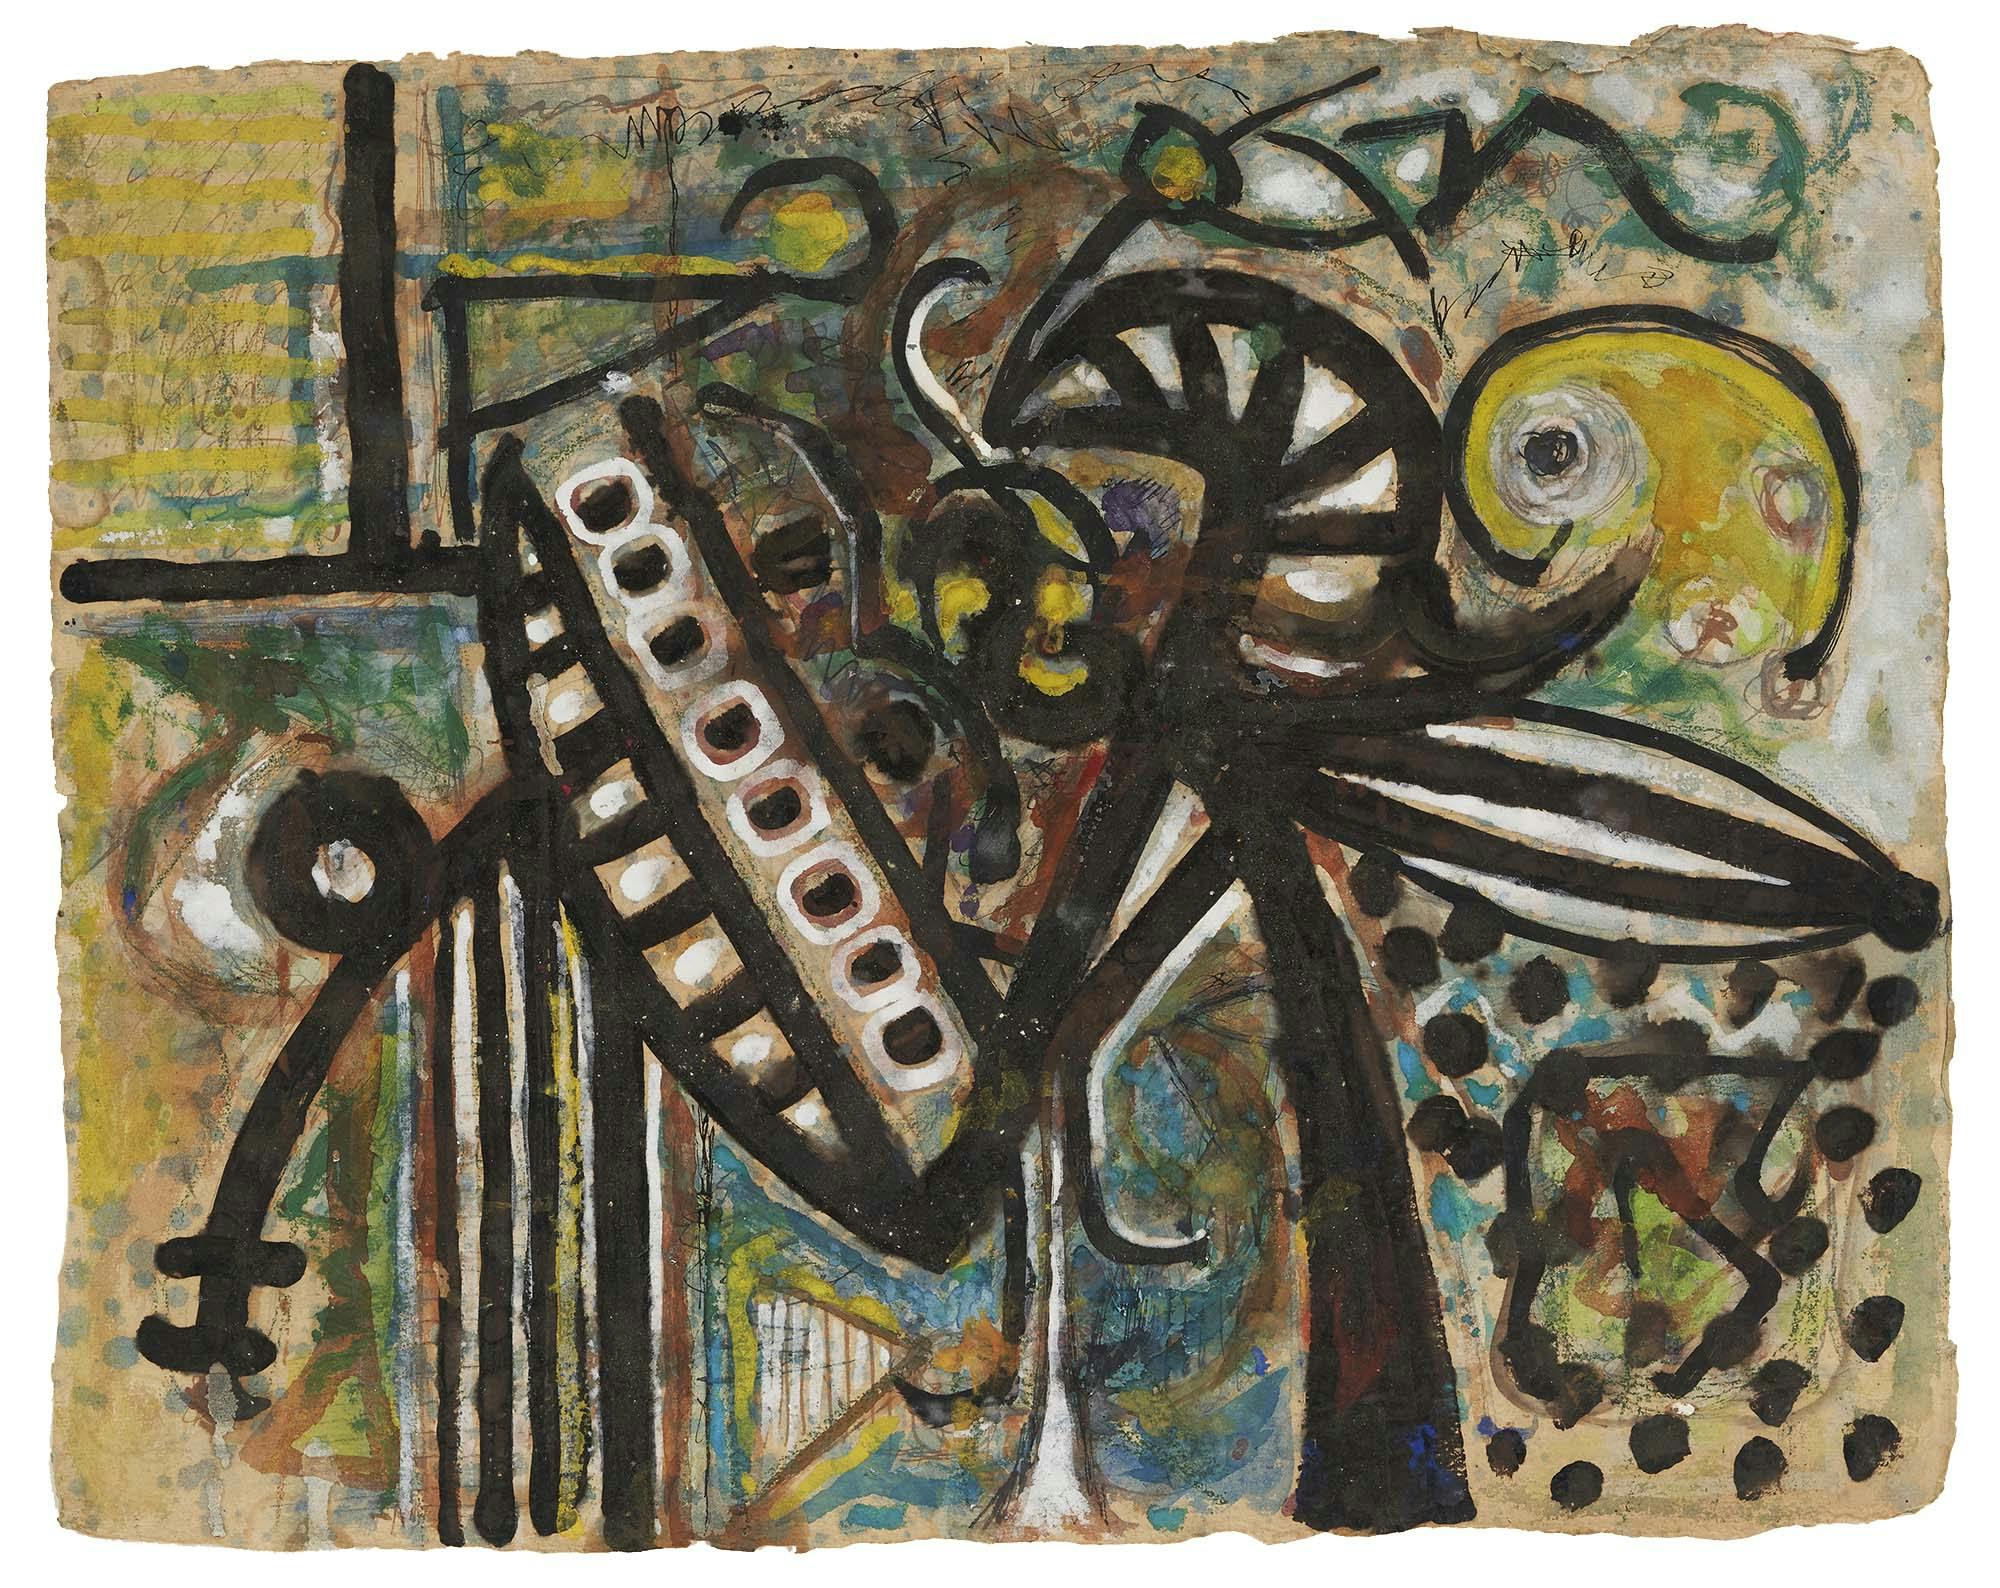 Archaic Dream
1940
Ink graphite, oil, gesso on paper
17 1/2 x 22 1/4 in. (44.4 x 56.5 cm)
 – The Richard Pousette-Dart Foundation